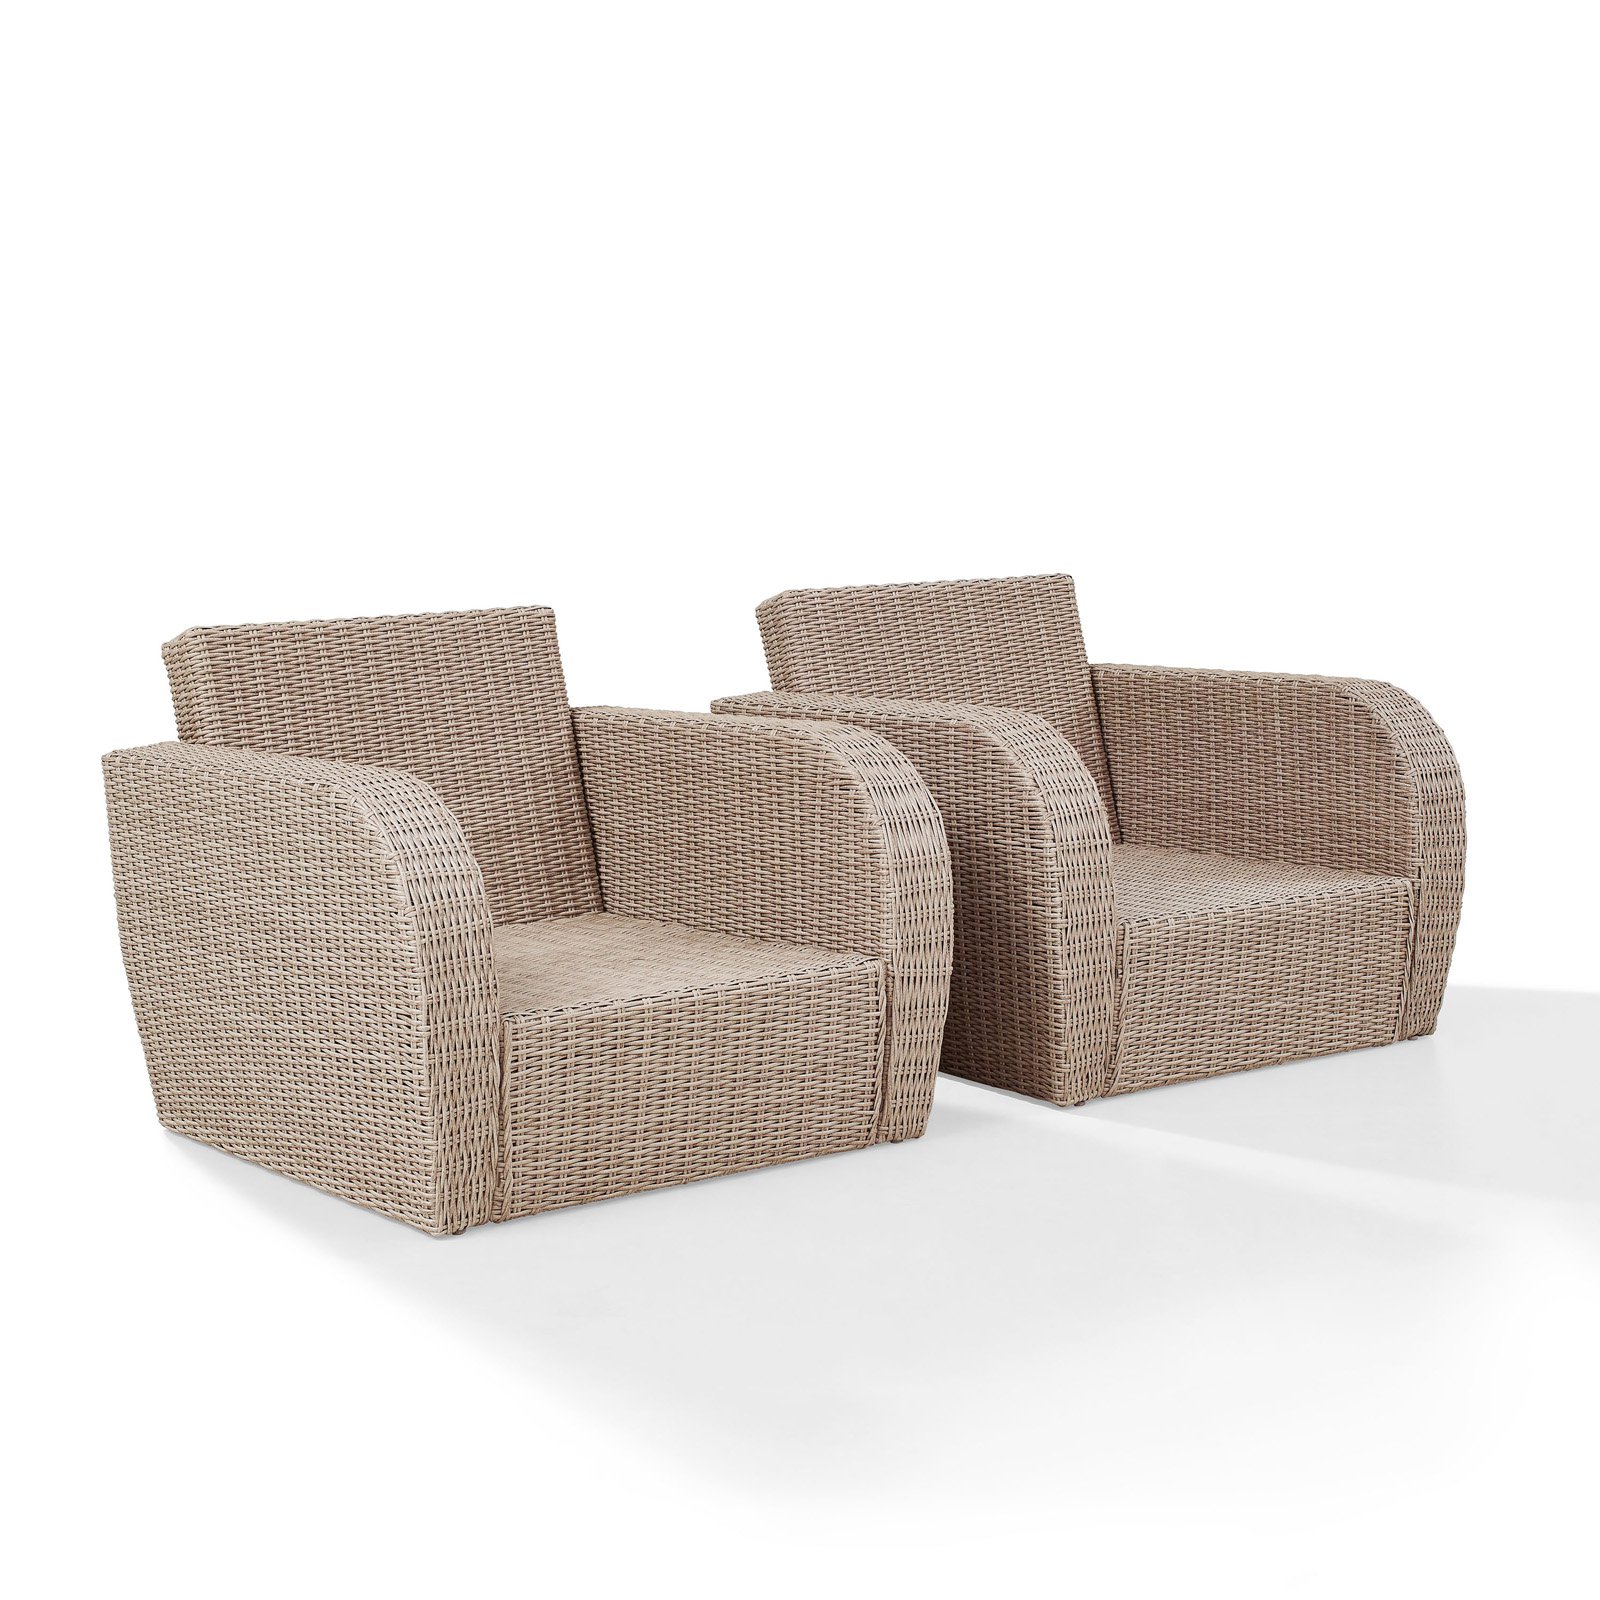 Crosley Furniture St Augustine 2 Pc Outdoor Wicker Seating Set With Mist Cushion - Two Outdoor Wicker Chairs - image 5 of 11